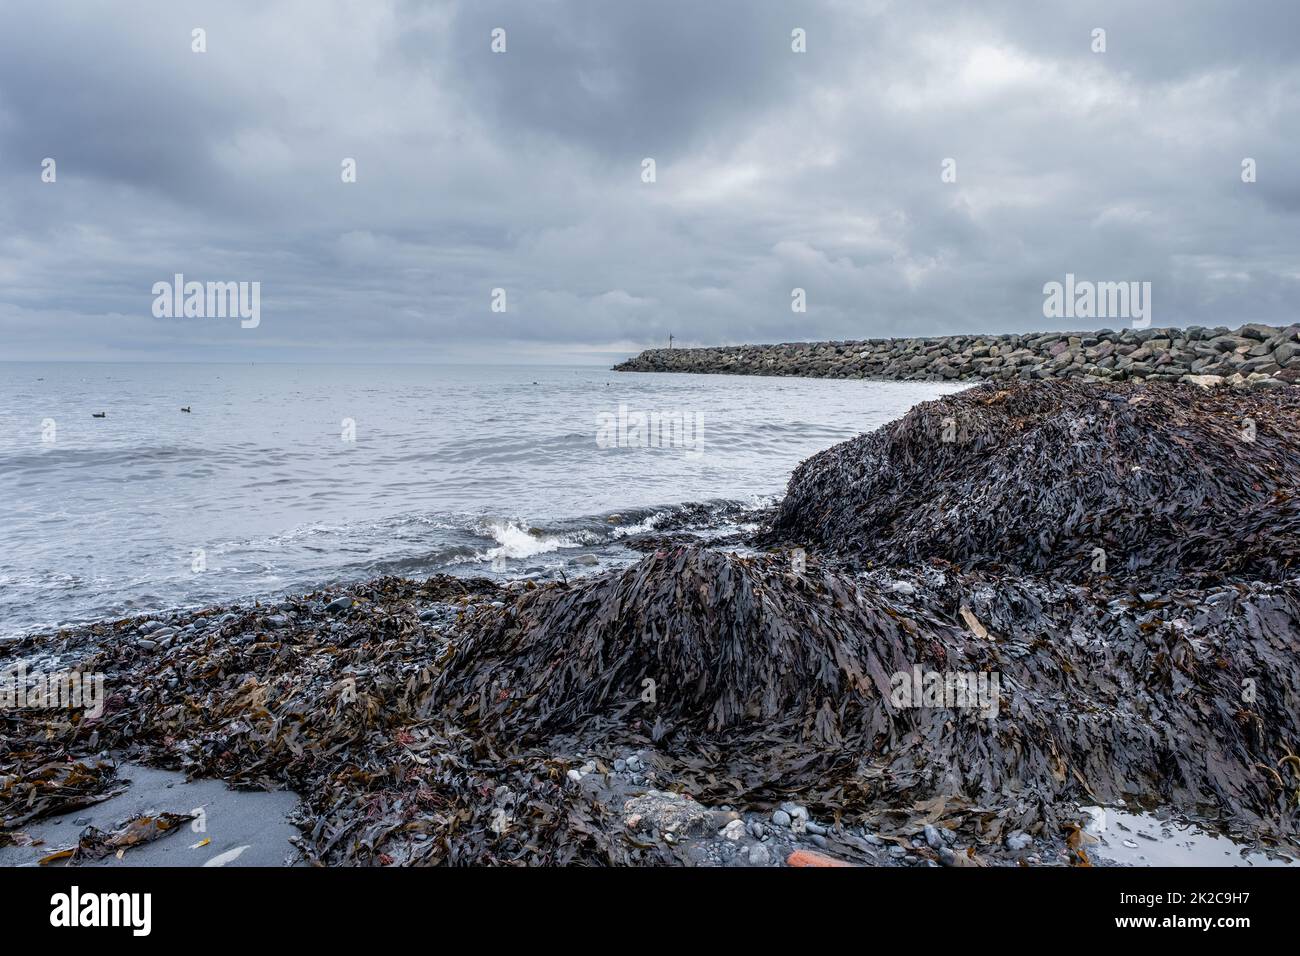 Mounds of seaweed cover Fisherman's Beach in Glace Bay Nova Scotia Canada. Stock Photo